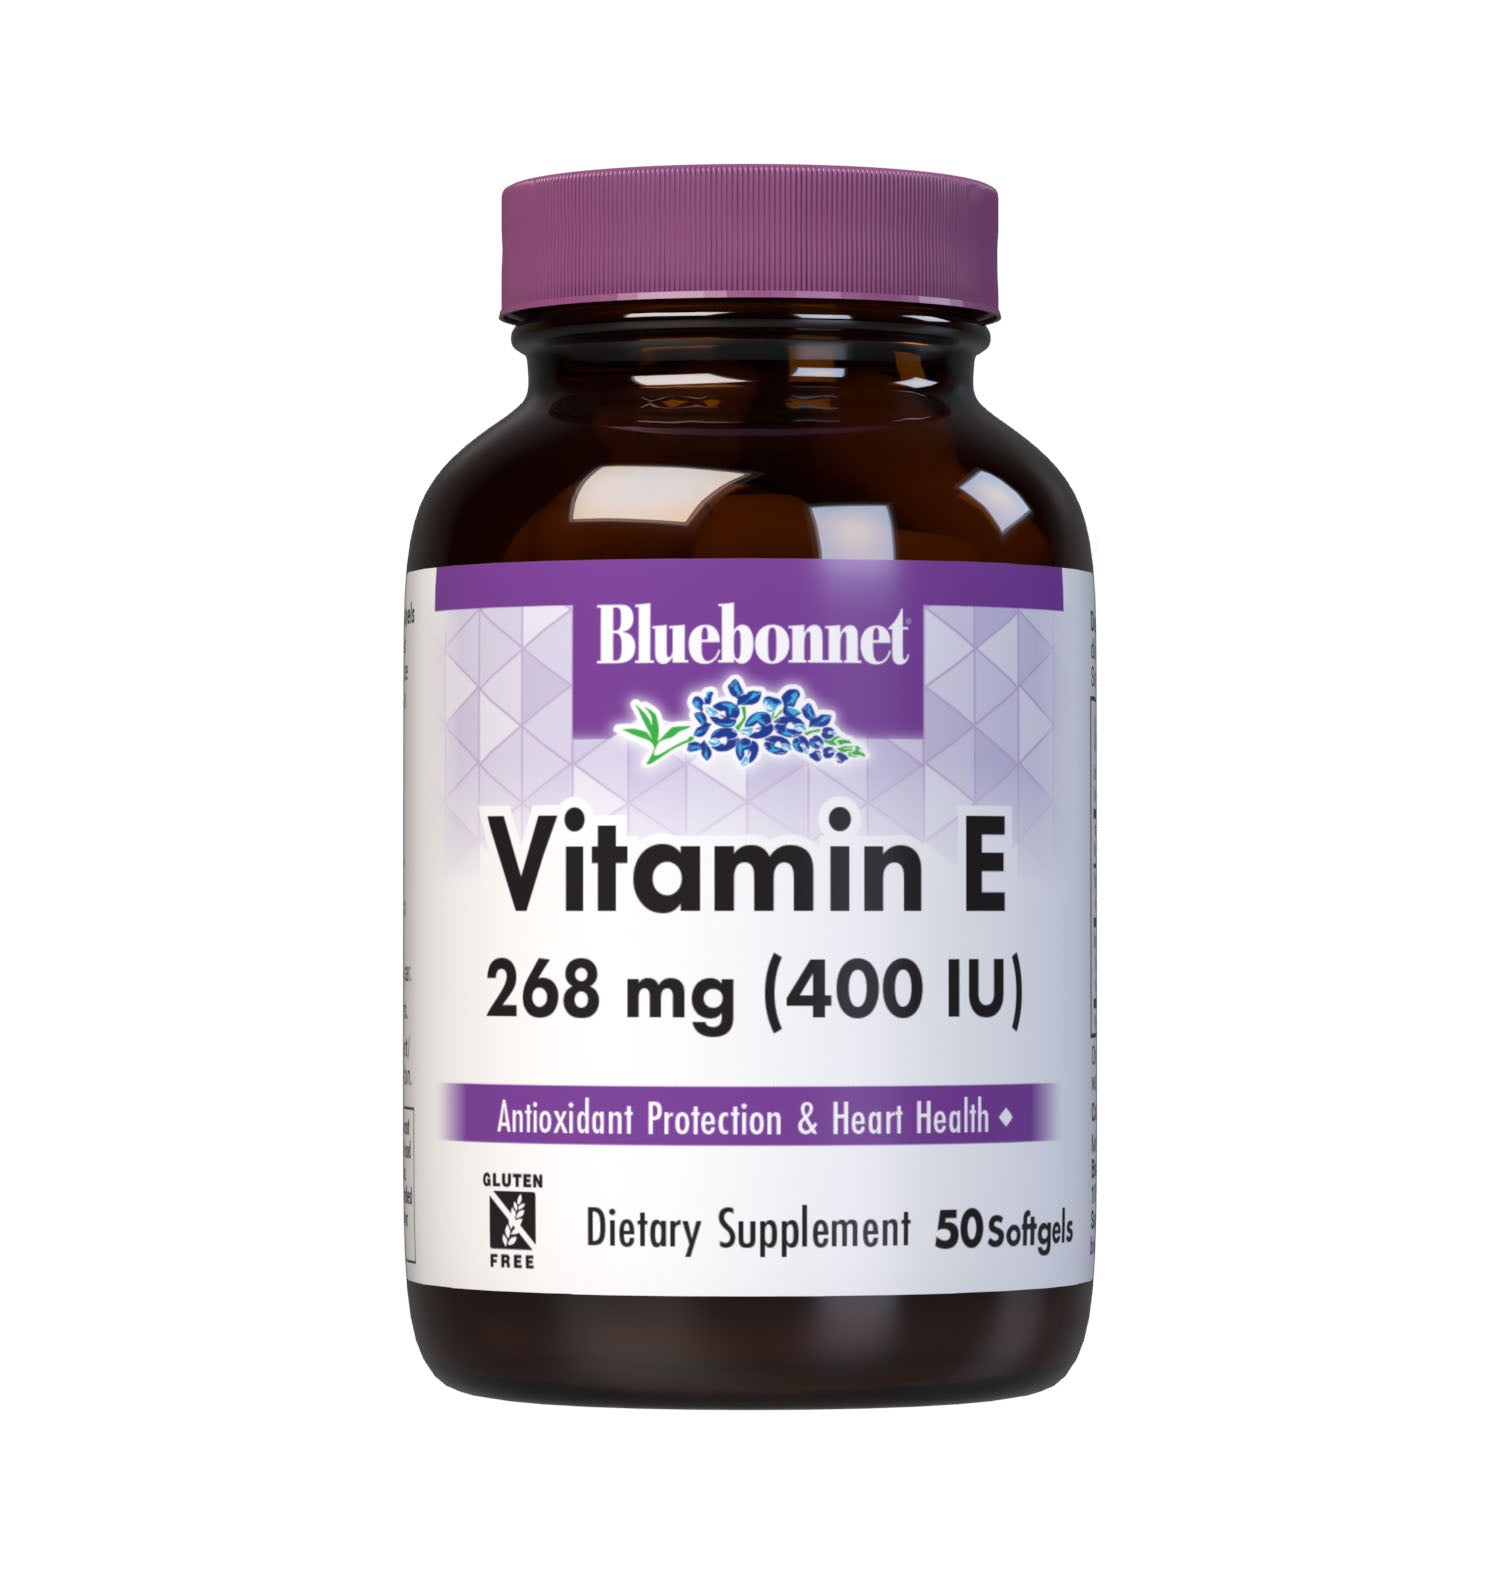 Bluebonnet’s Vitamin E 268 mg (400 IU) Mixed Softgels are specially formulated with d-alpha tocopherol and tocopherol isomers (beta, delta and gamma) in a base of vegetable oil. #size_50 count